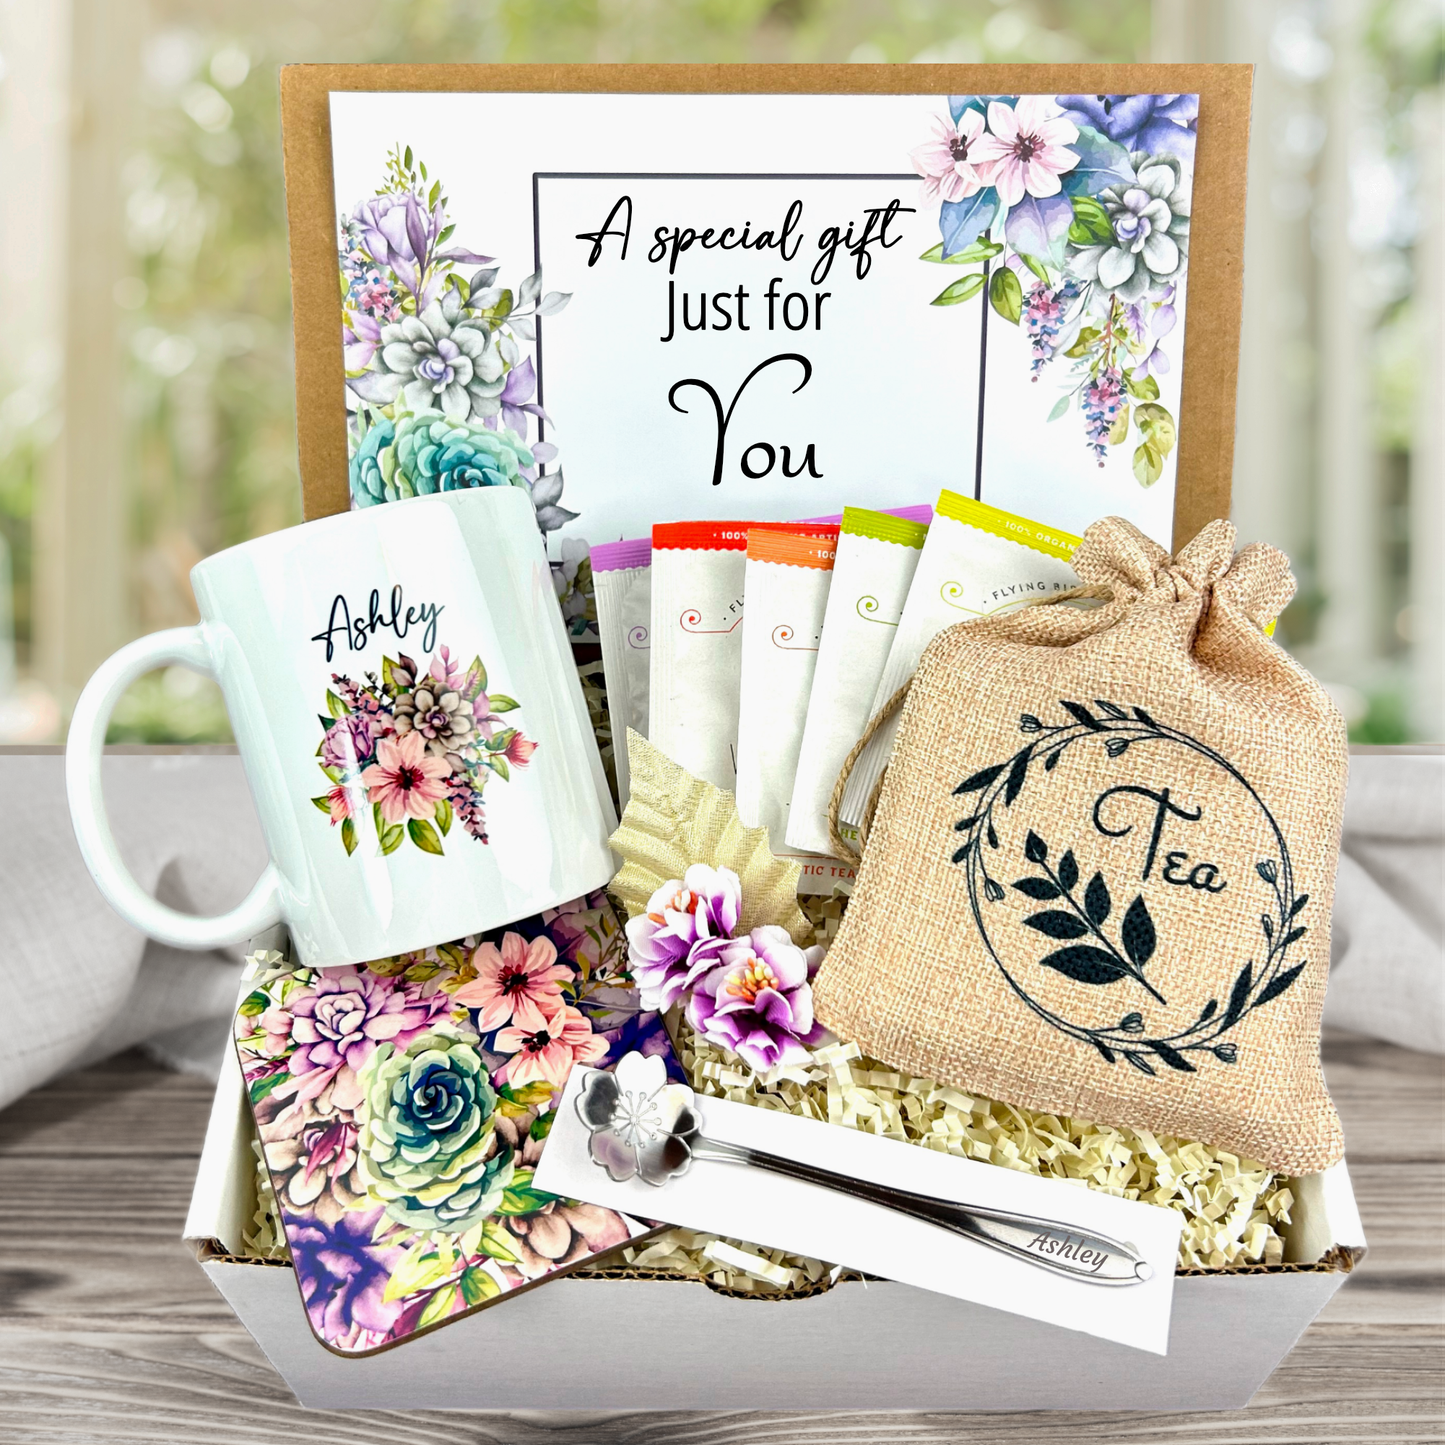 Personalized mug and engraved spoon set accompanied by a large 8-ounce scented candle, an assortment of five artisan teas, and a matching coaster set for a complete indulgent experience with Purple flower theme